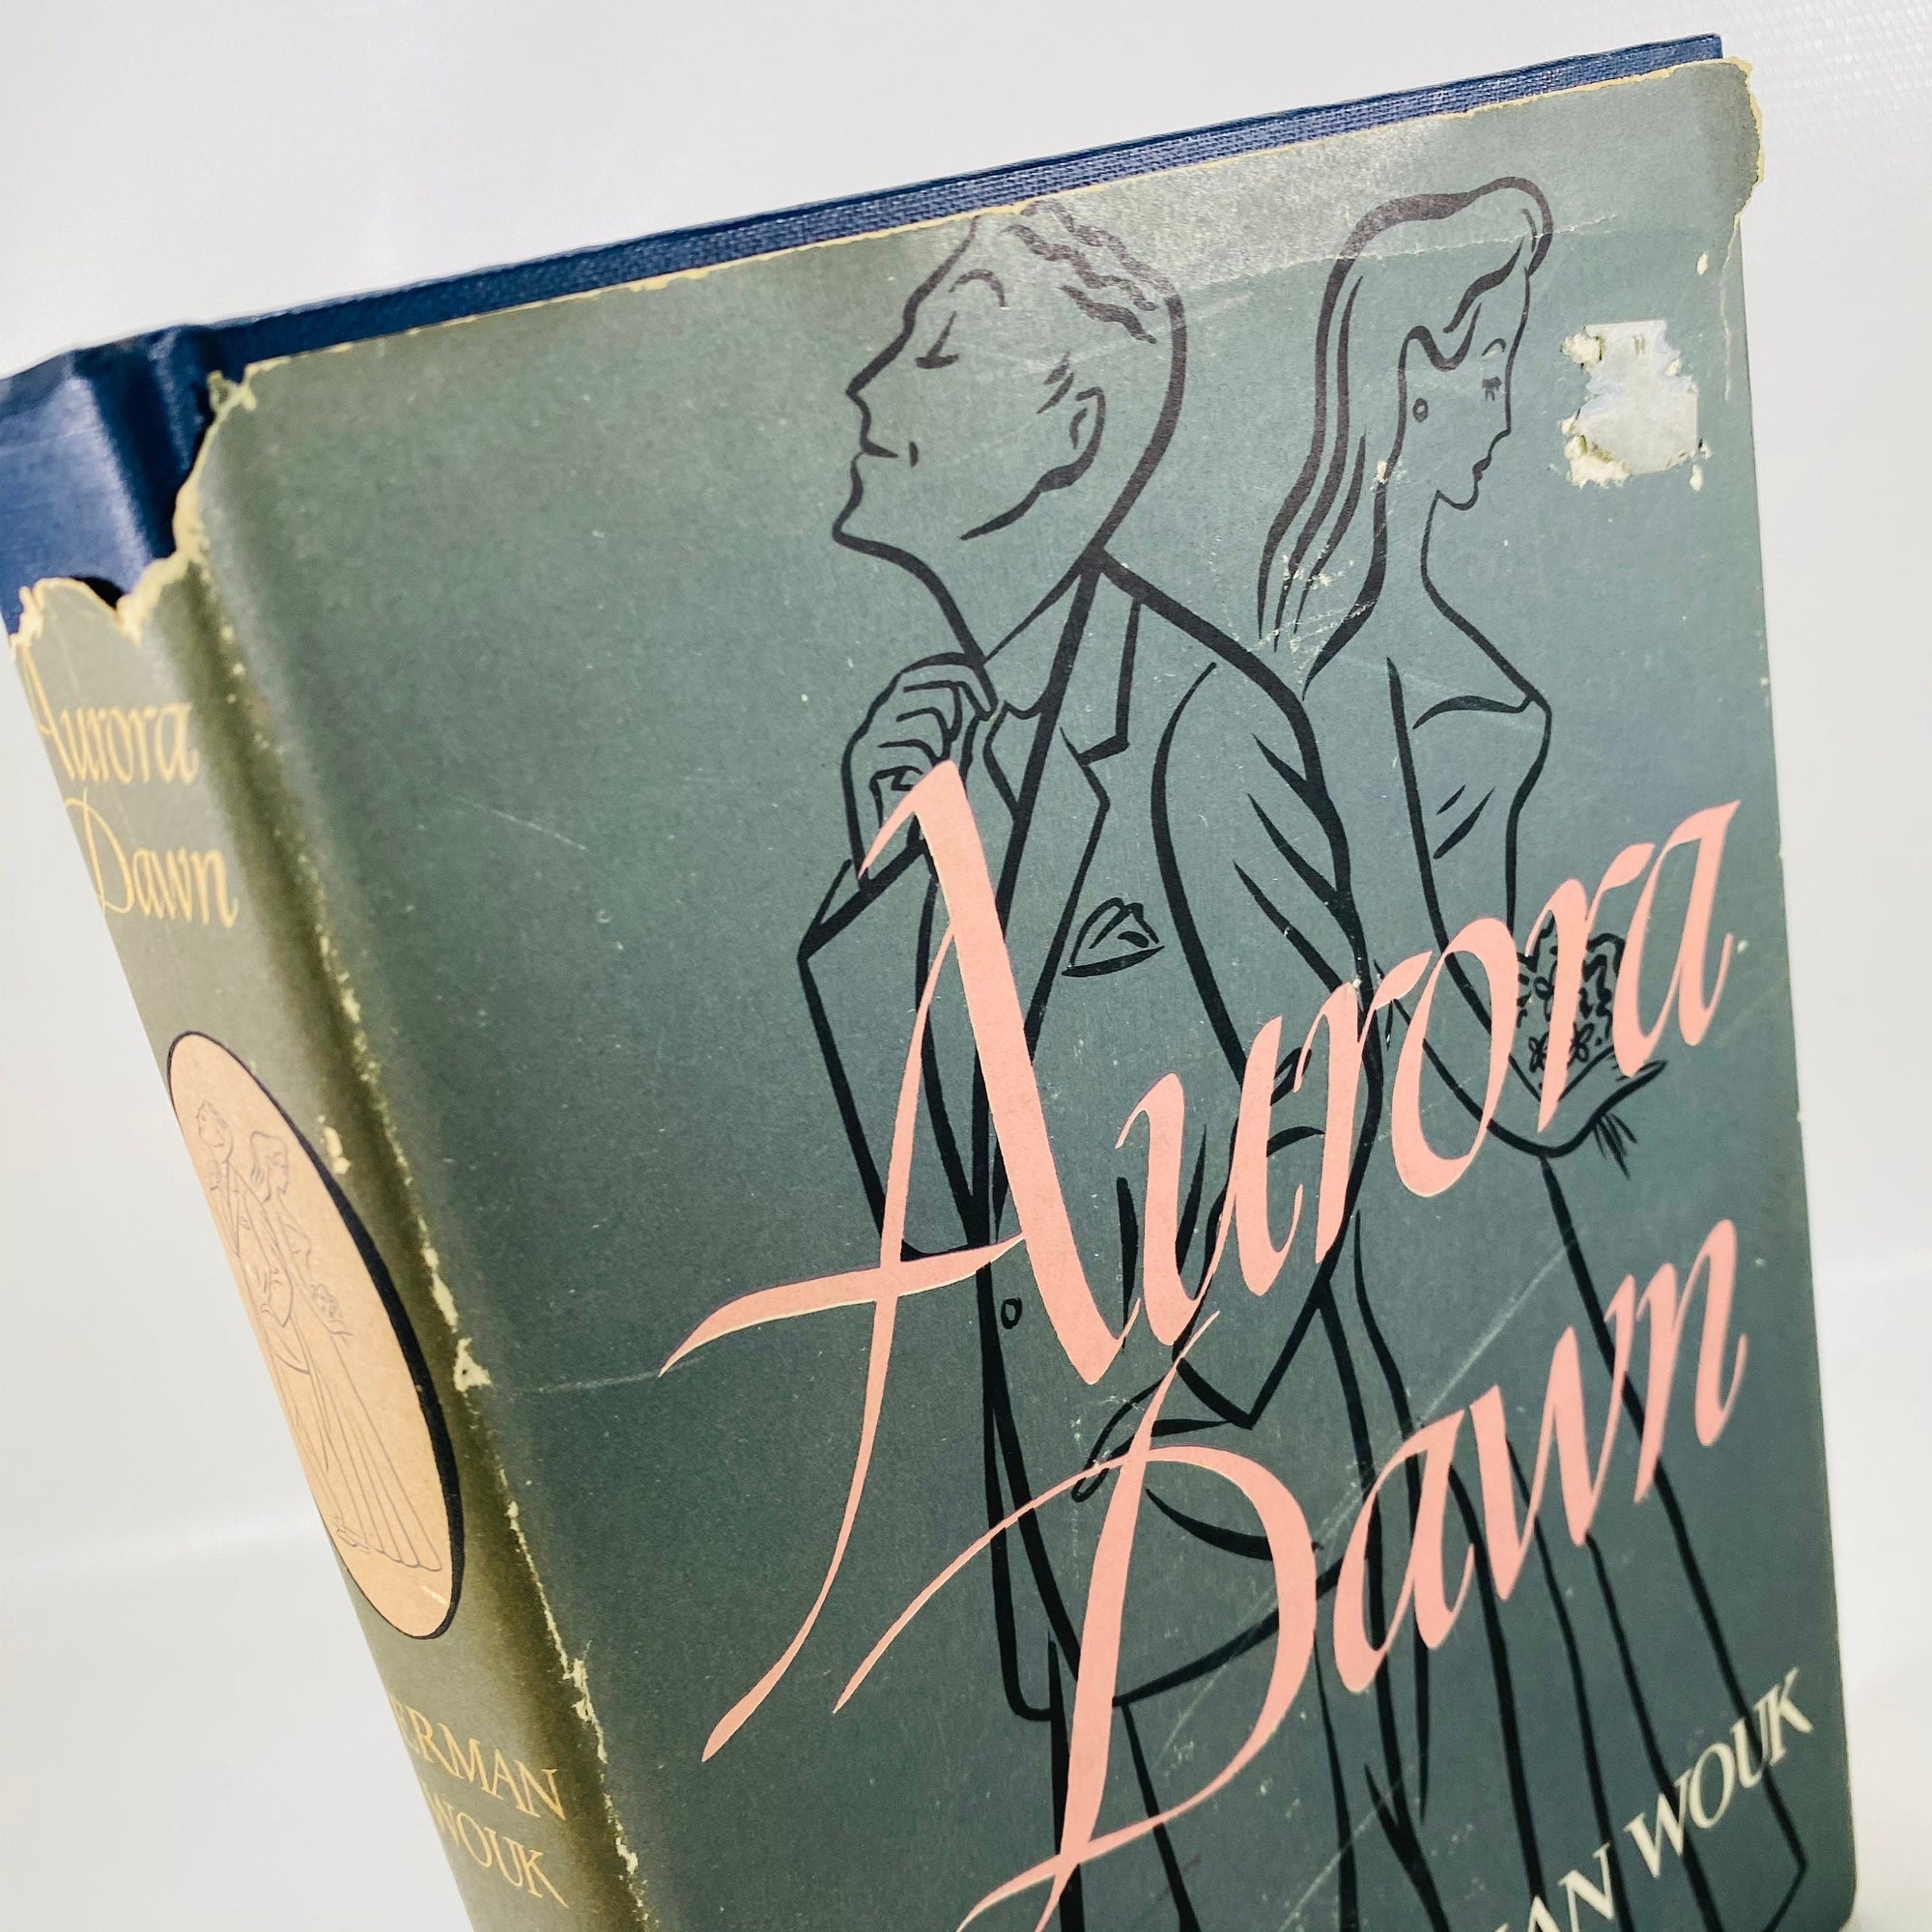 Aurora Dawn or The True Story of Andrew  Reale a novel by Herman Wouk 1947 Simon Schuster Vintage Book